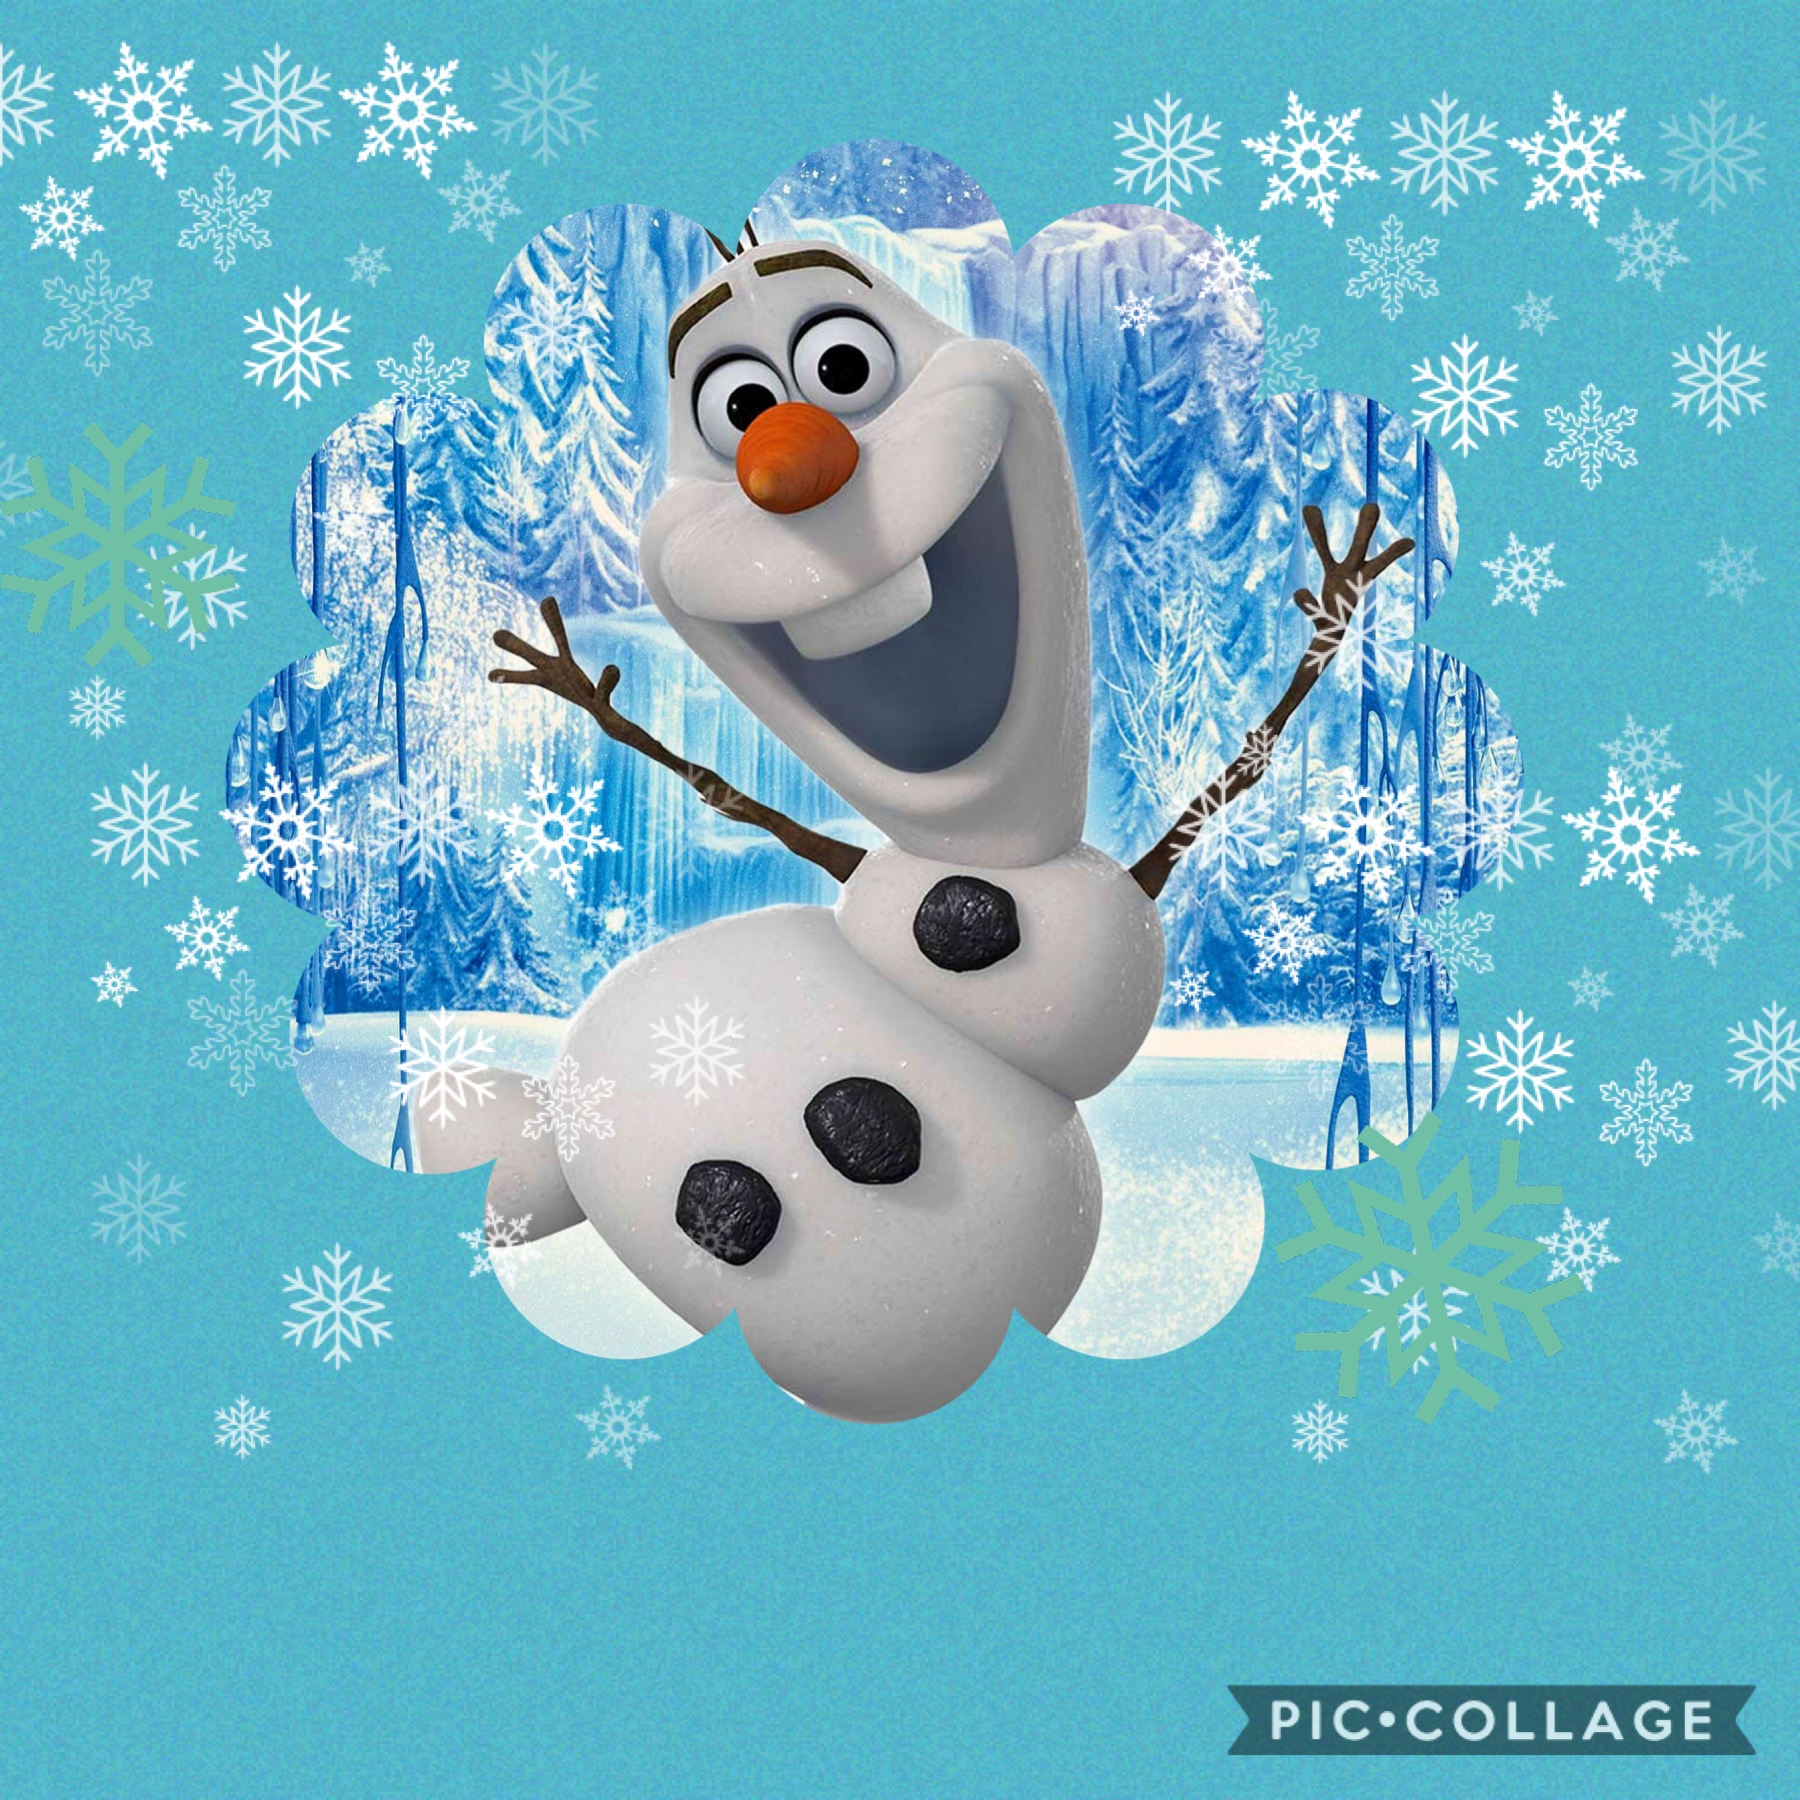 Oh it’s Olaf!!!